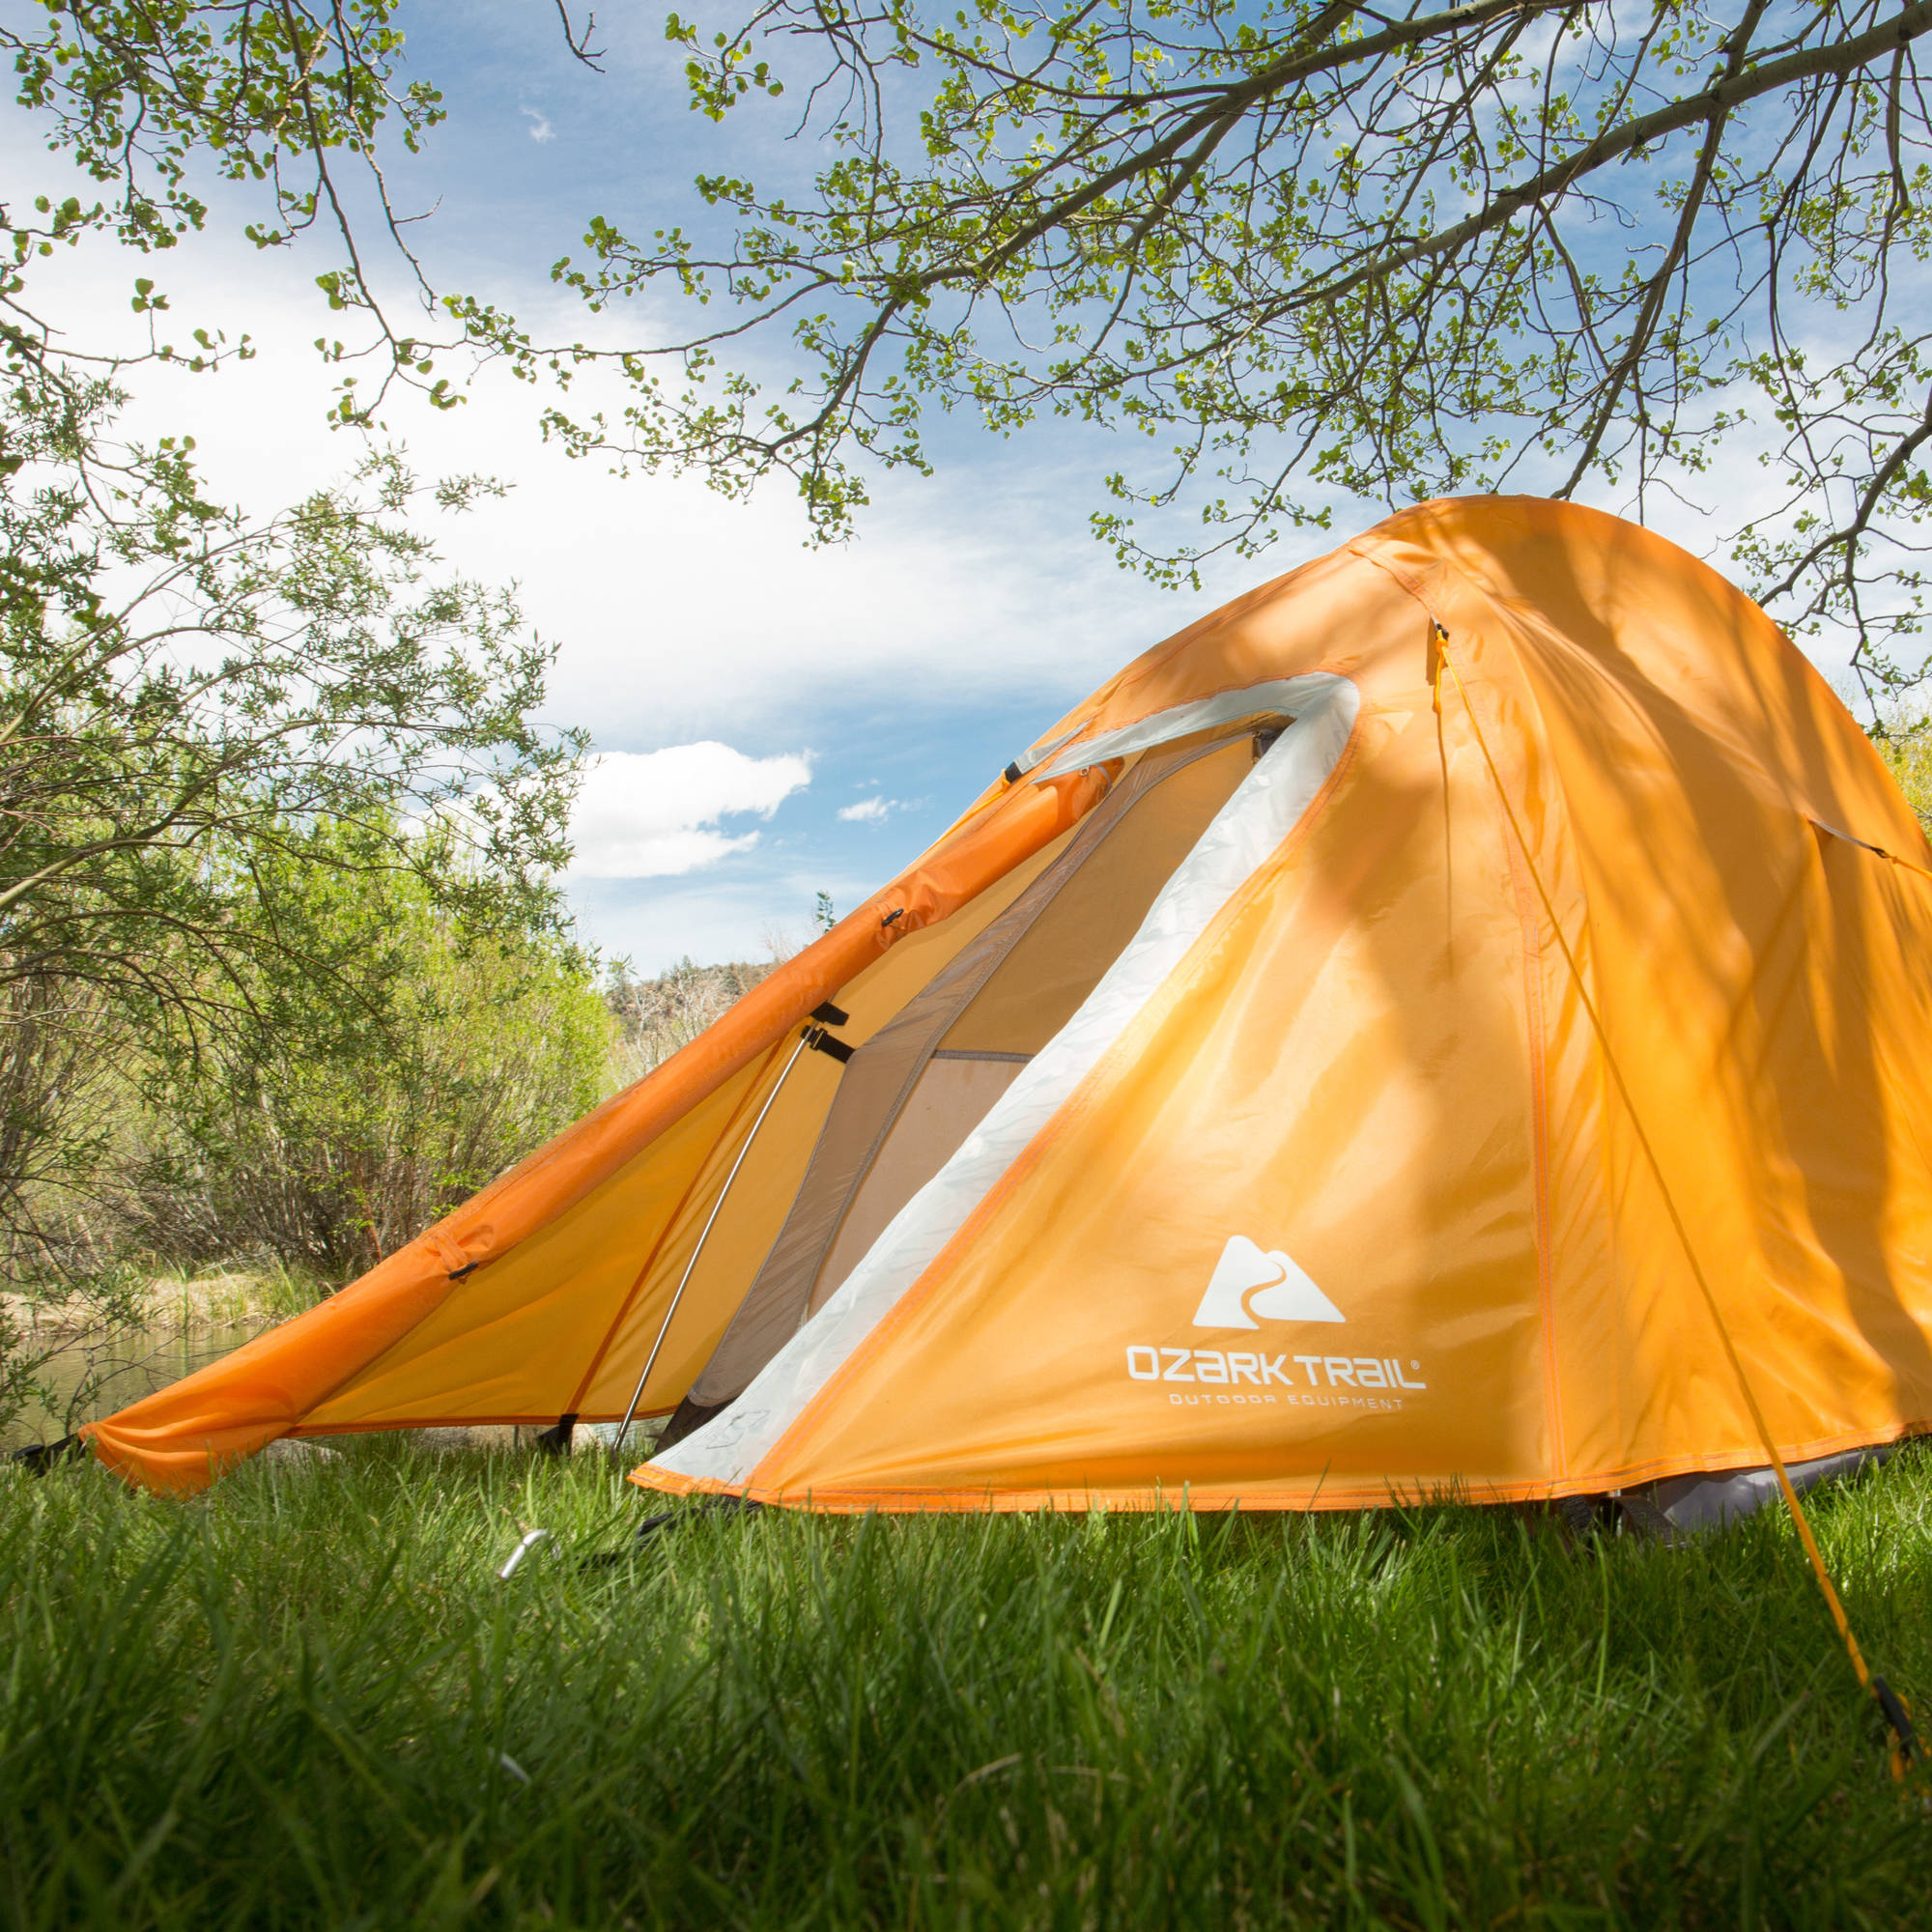 Ozark Trail Ultra Light Outdoor Back Packing 4' x 7' x 6'5" One-Room Tent, Orange - image 5 of 10